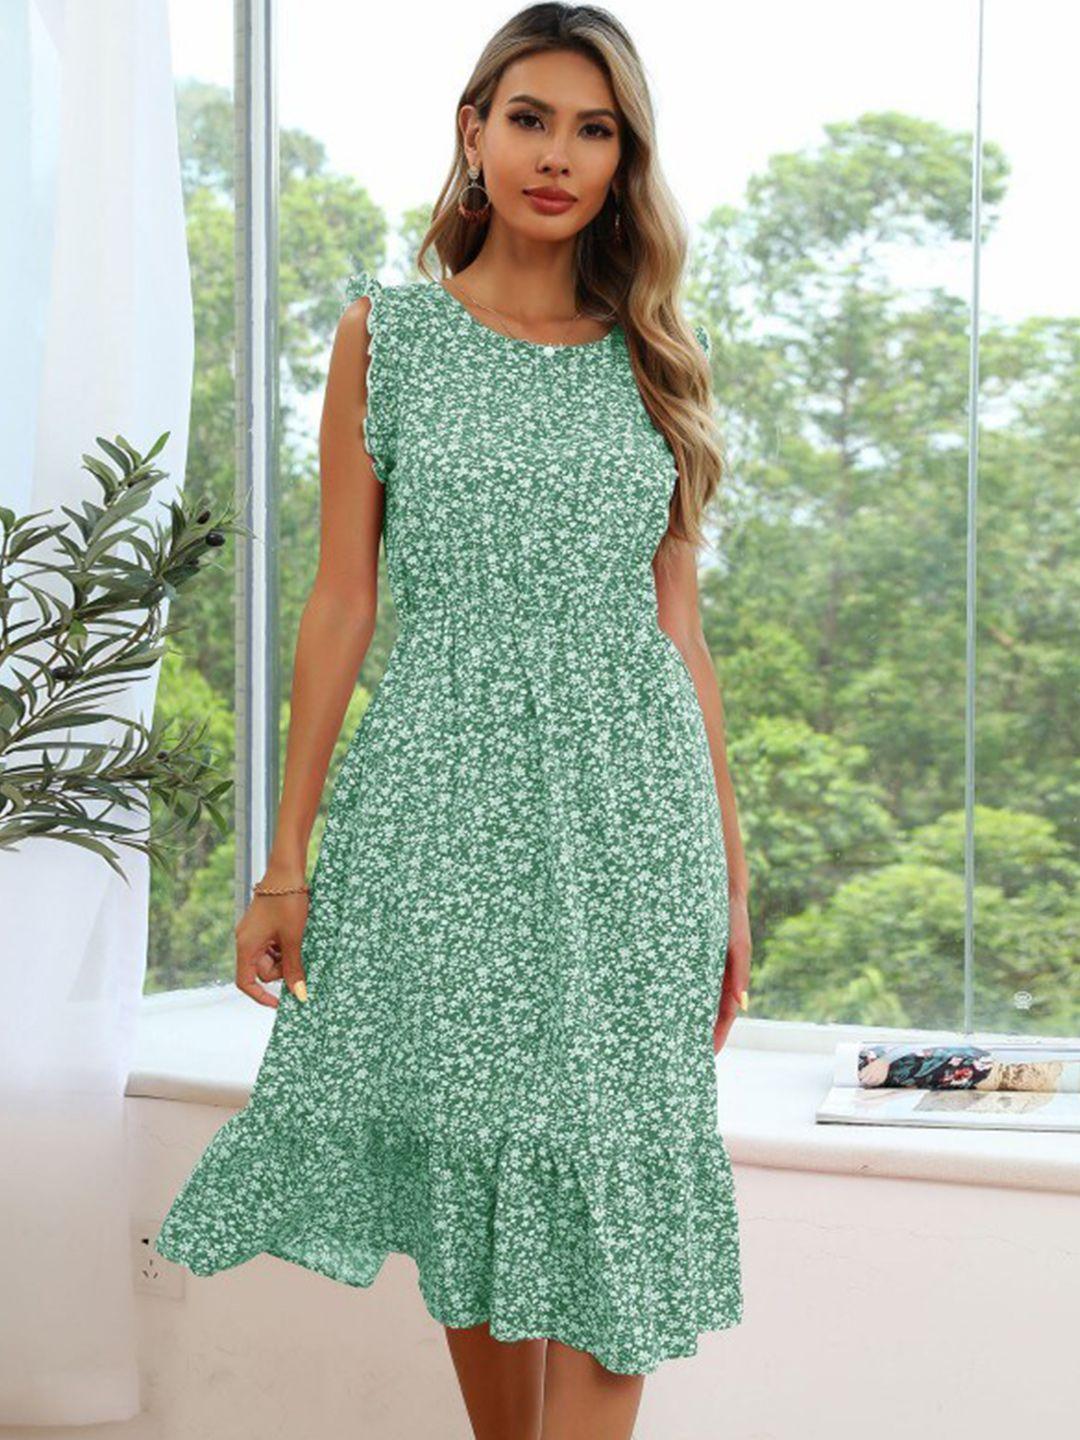 stylecast green & white floral printed sleeveless ruffles a-line dress